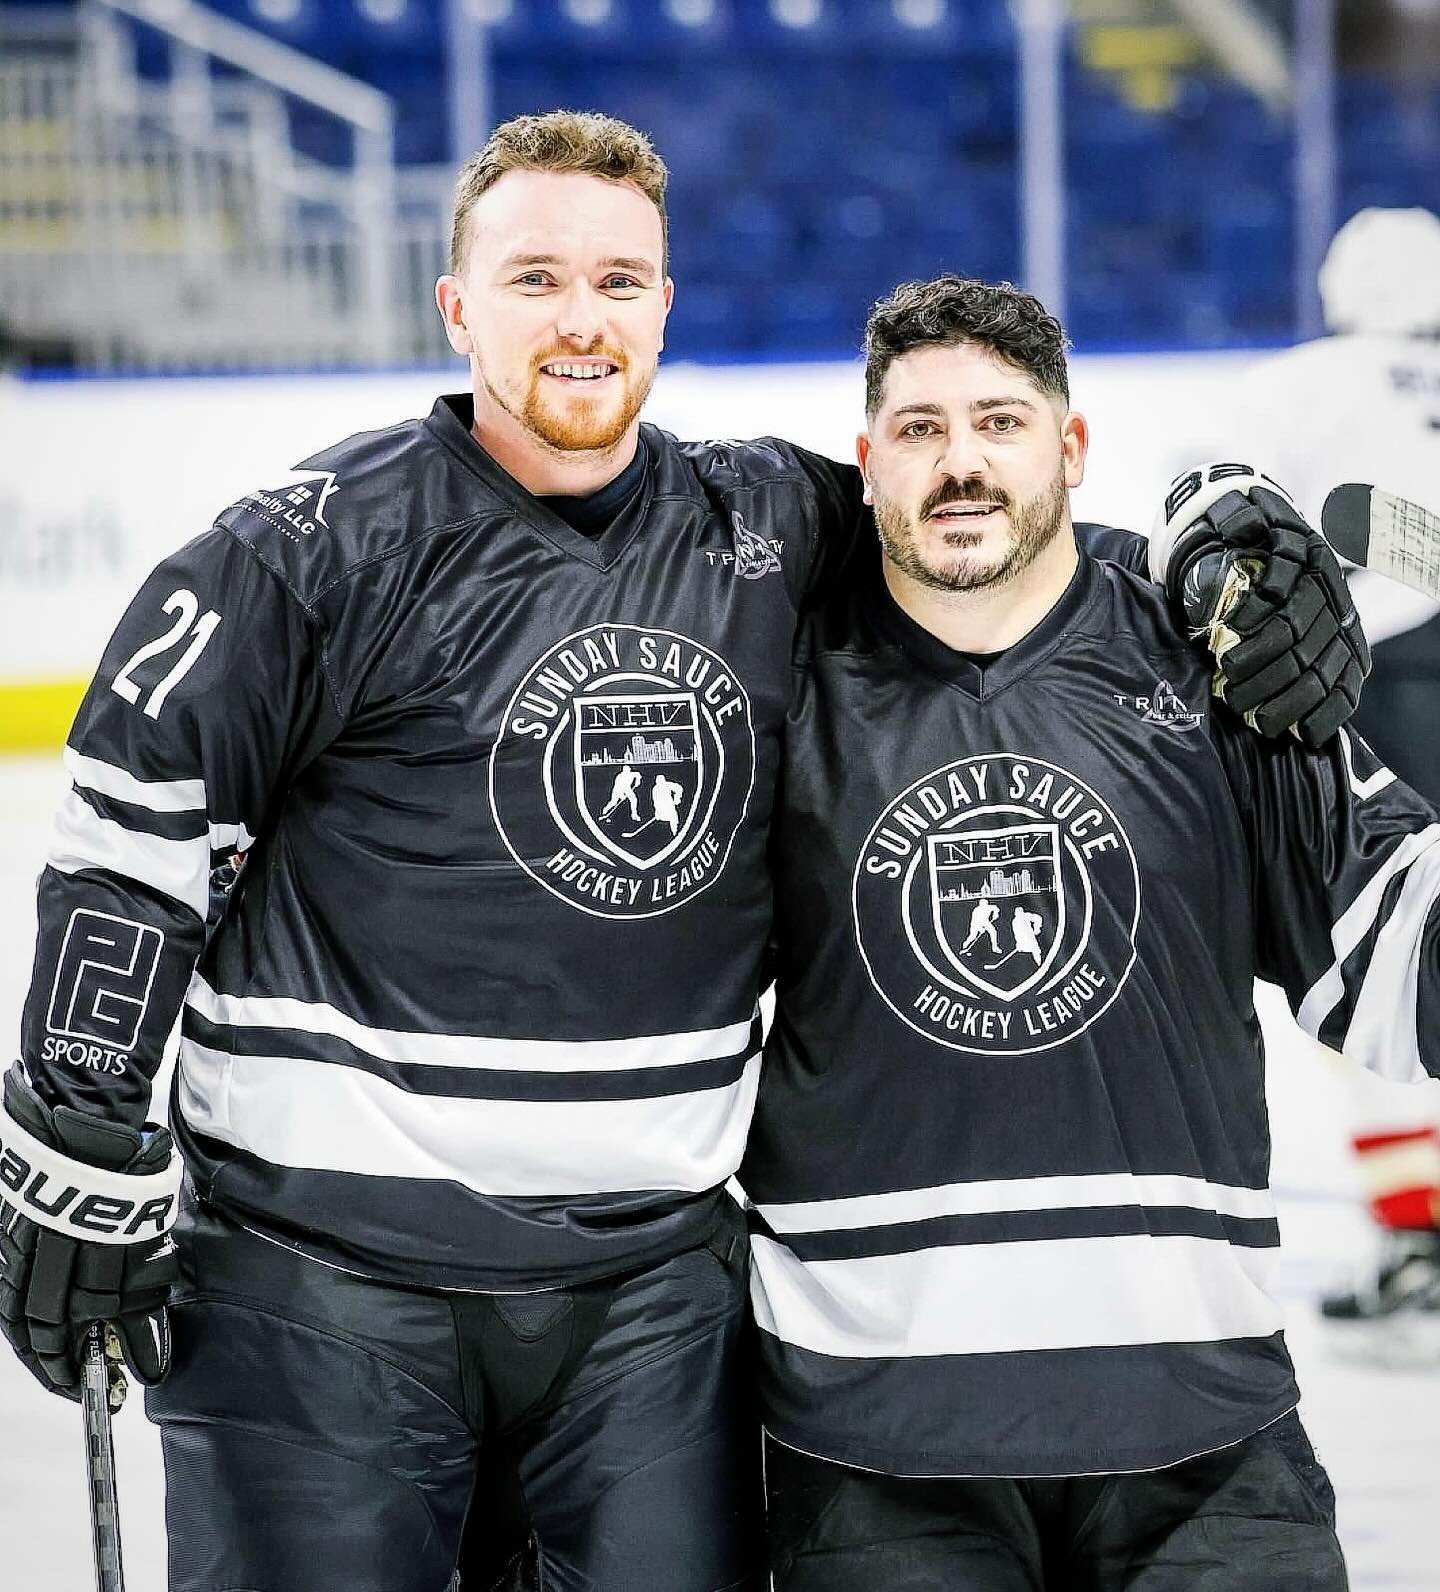 A special thanks to @manifestmillennial and @aj_gemmell for organizing another great winter session of Sunday Sauce Hockey at Ralph Walker Rink! We looking forward to plenty of great skates and events in the future and of course meeting plenty more g